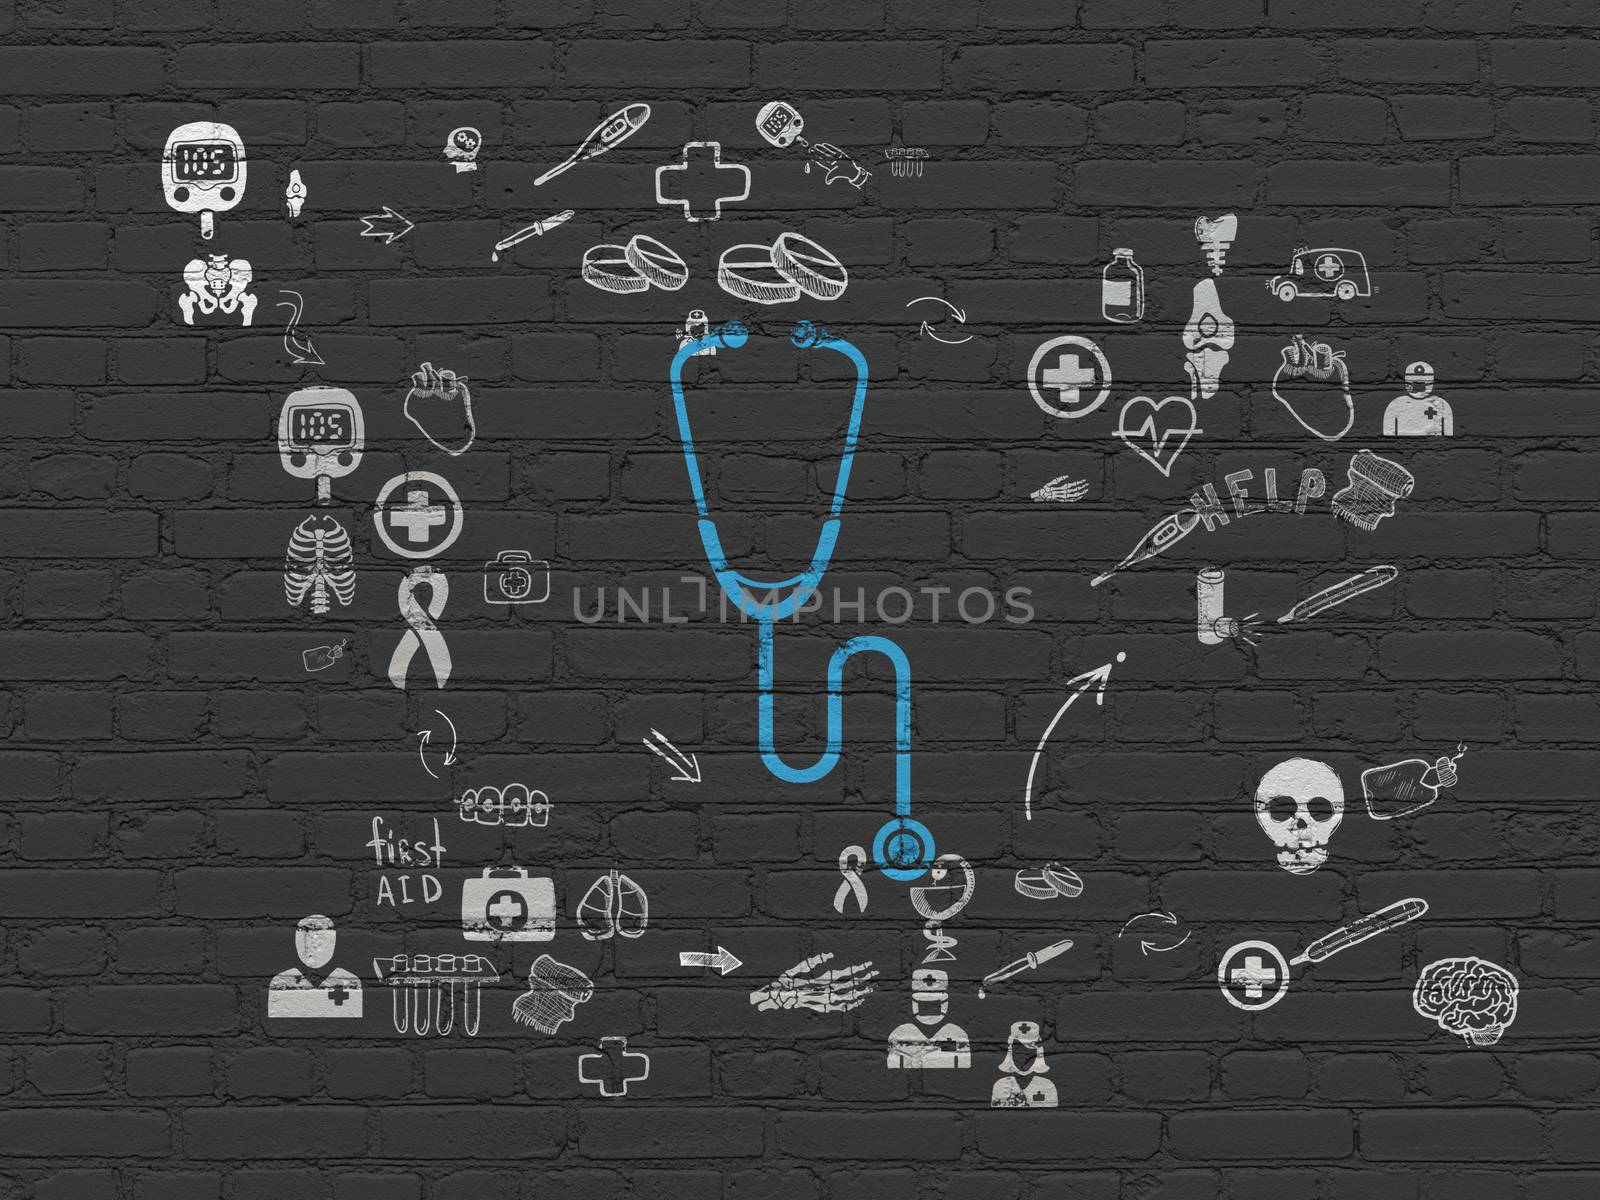 Medicine concept: Painted blue Stethoscope icon on Black Brick wall background with Scheme Of Hand Drawn Medicine Icons